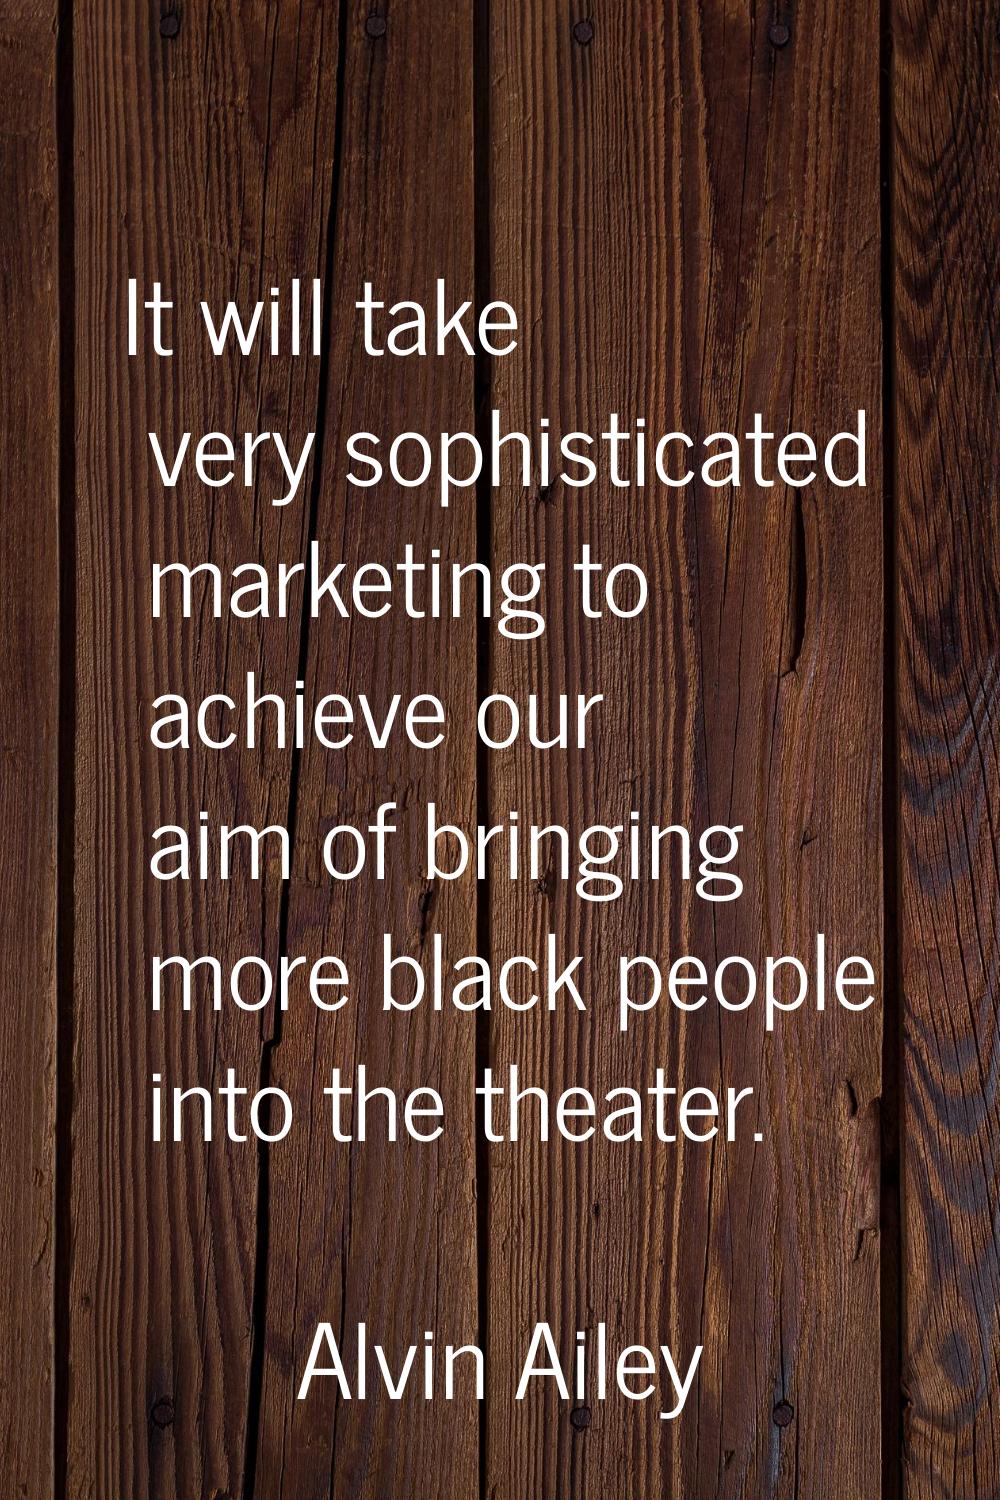 It will take very sophisticated marketing to achieve our aim of bringing more black people into the